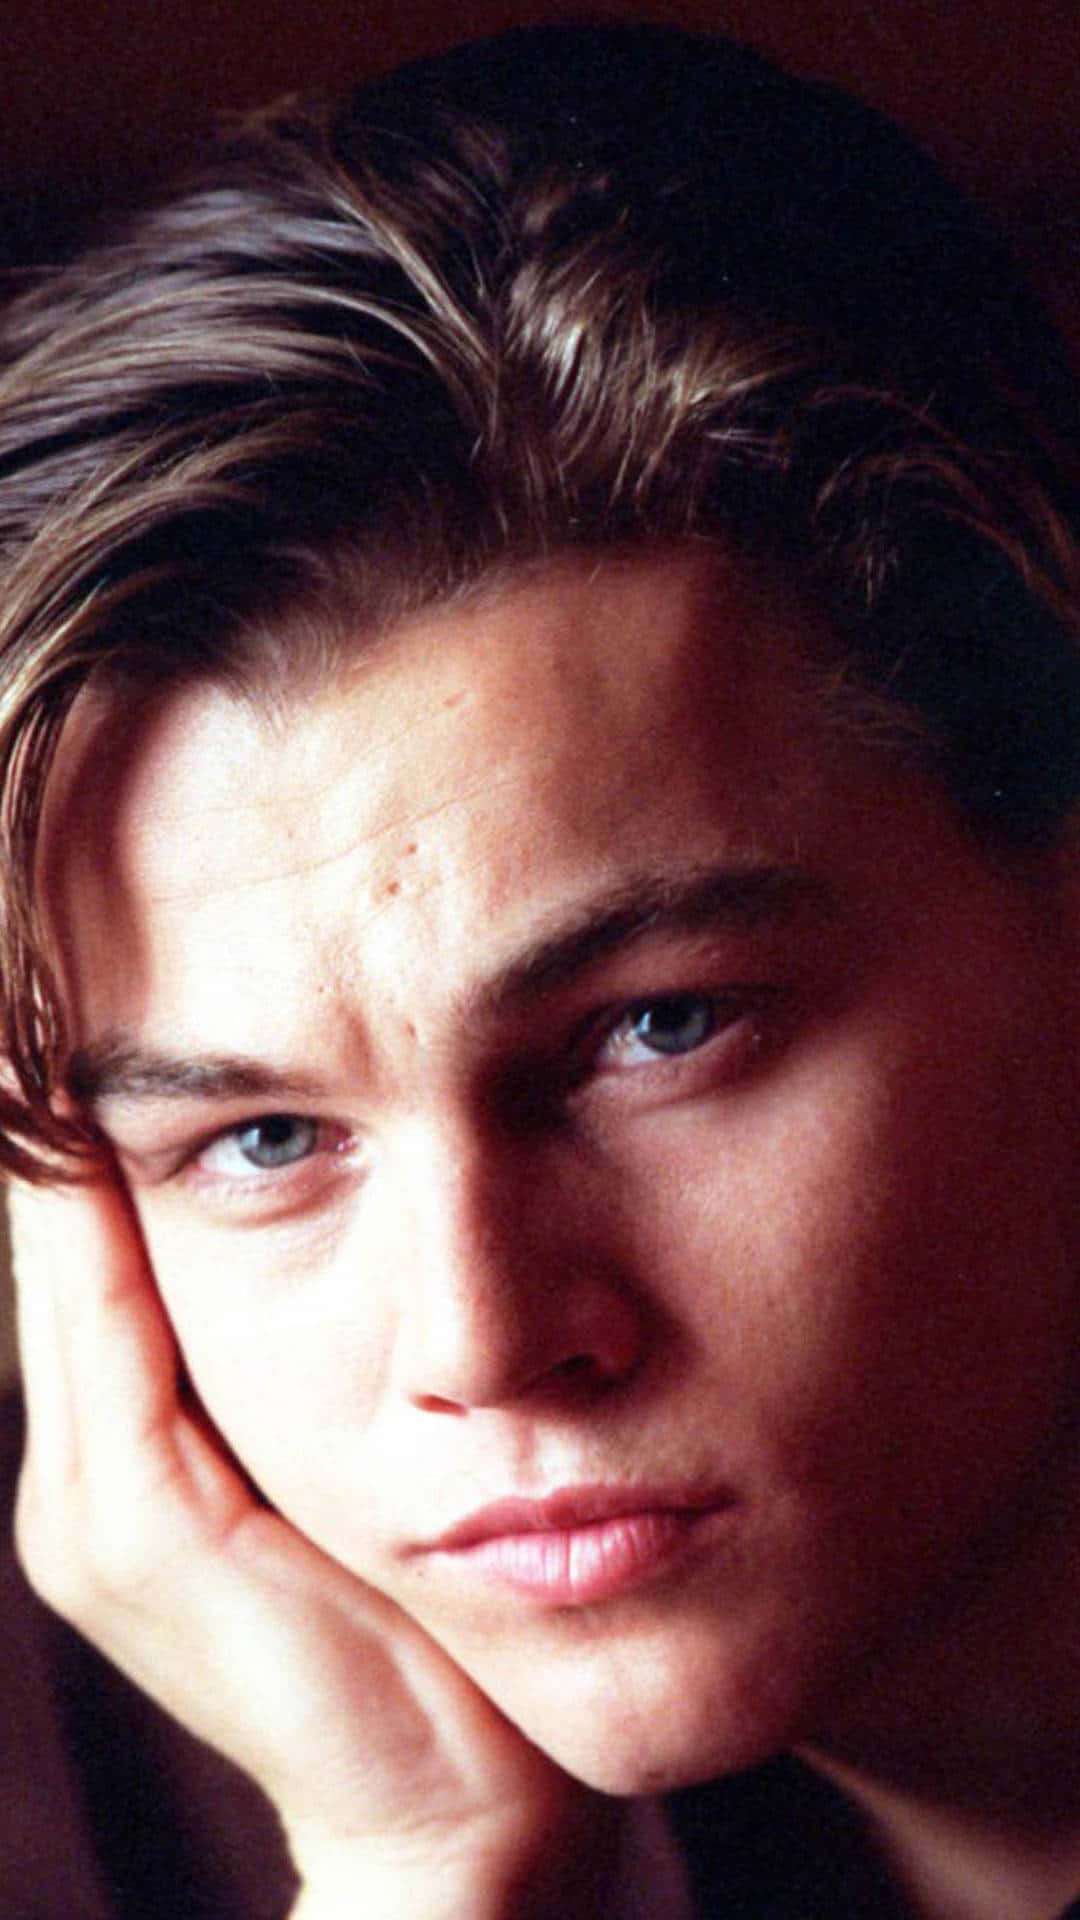 Leonardo DiCaprio wallpaper for iPhone with resolution 1080X1920 pixel. You can make this wallpaper for your iPhone 5, 6, 7, 8, X backgrounds, Mobile Screensaver, or iPad Lock Screen - Leonardo DiCaprio